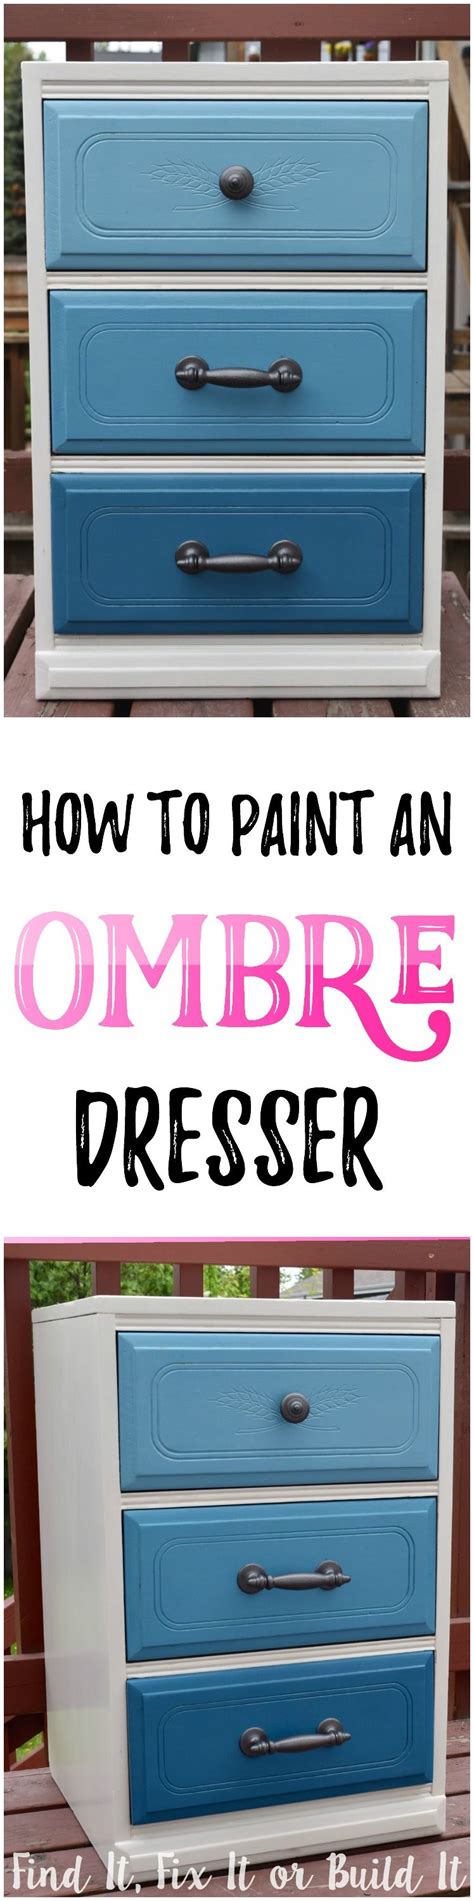 How To Paint An Ombre Dresser Recipe For Ratios To Get The Ombré Look